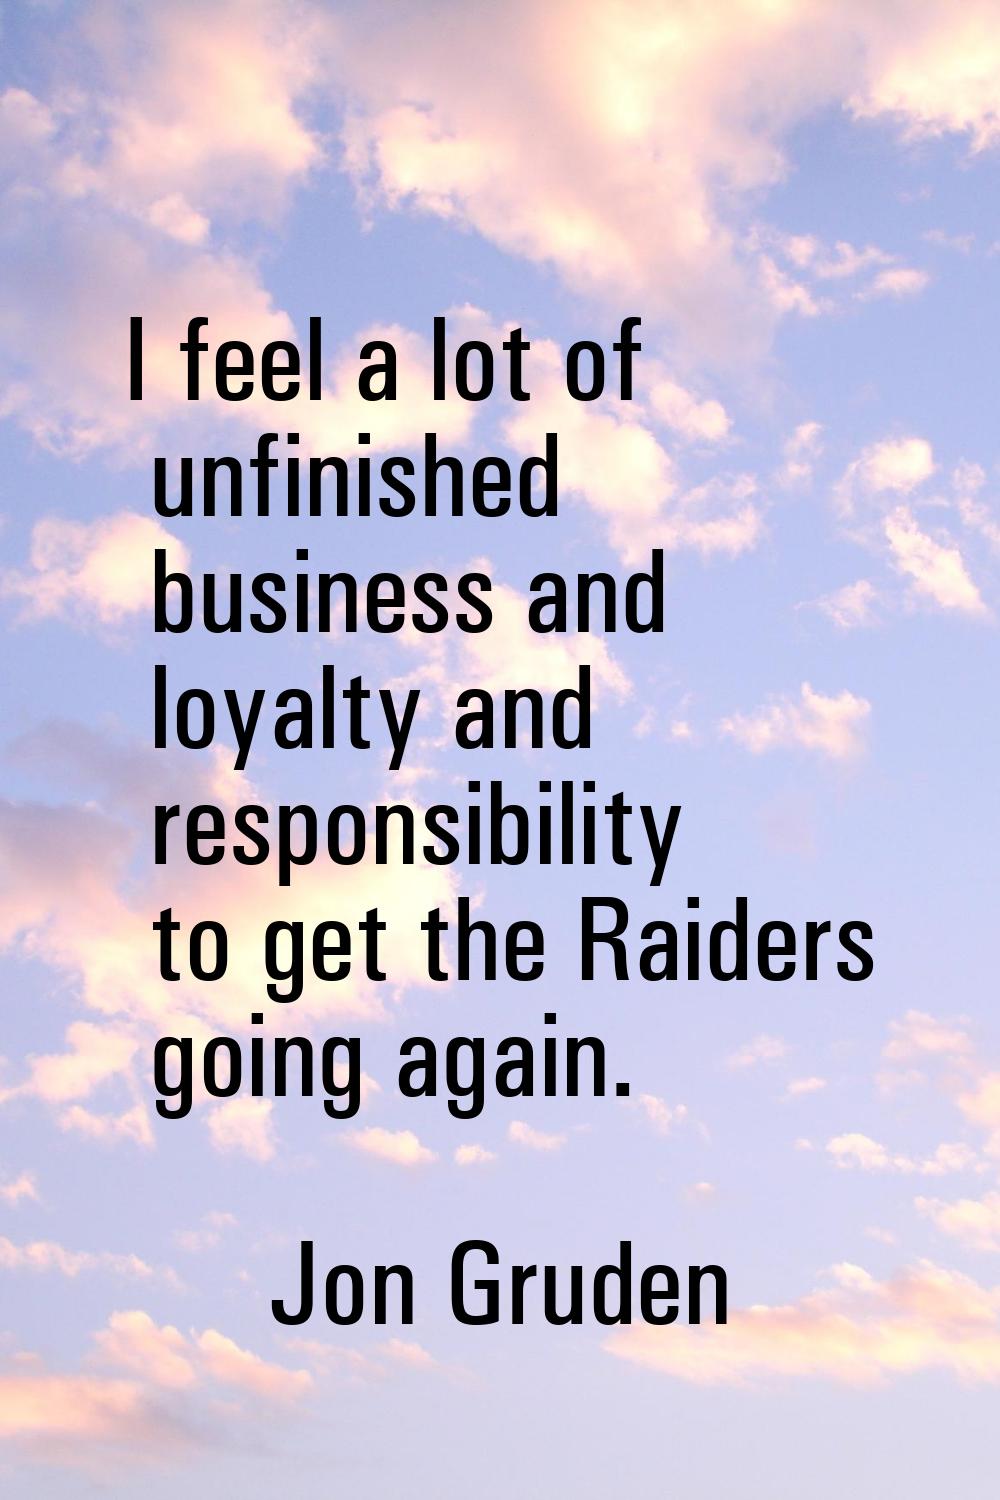 I feel a lot of unfinished business and loyalty and responsibility to get the Raiders going again.